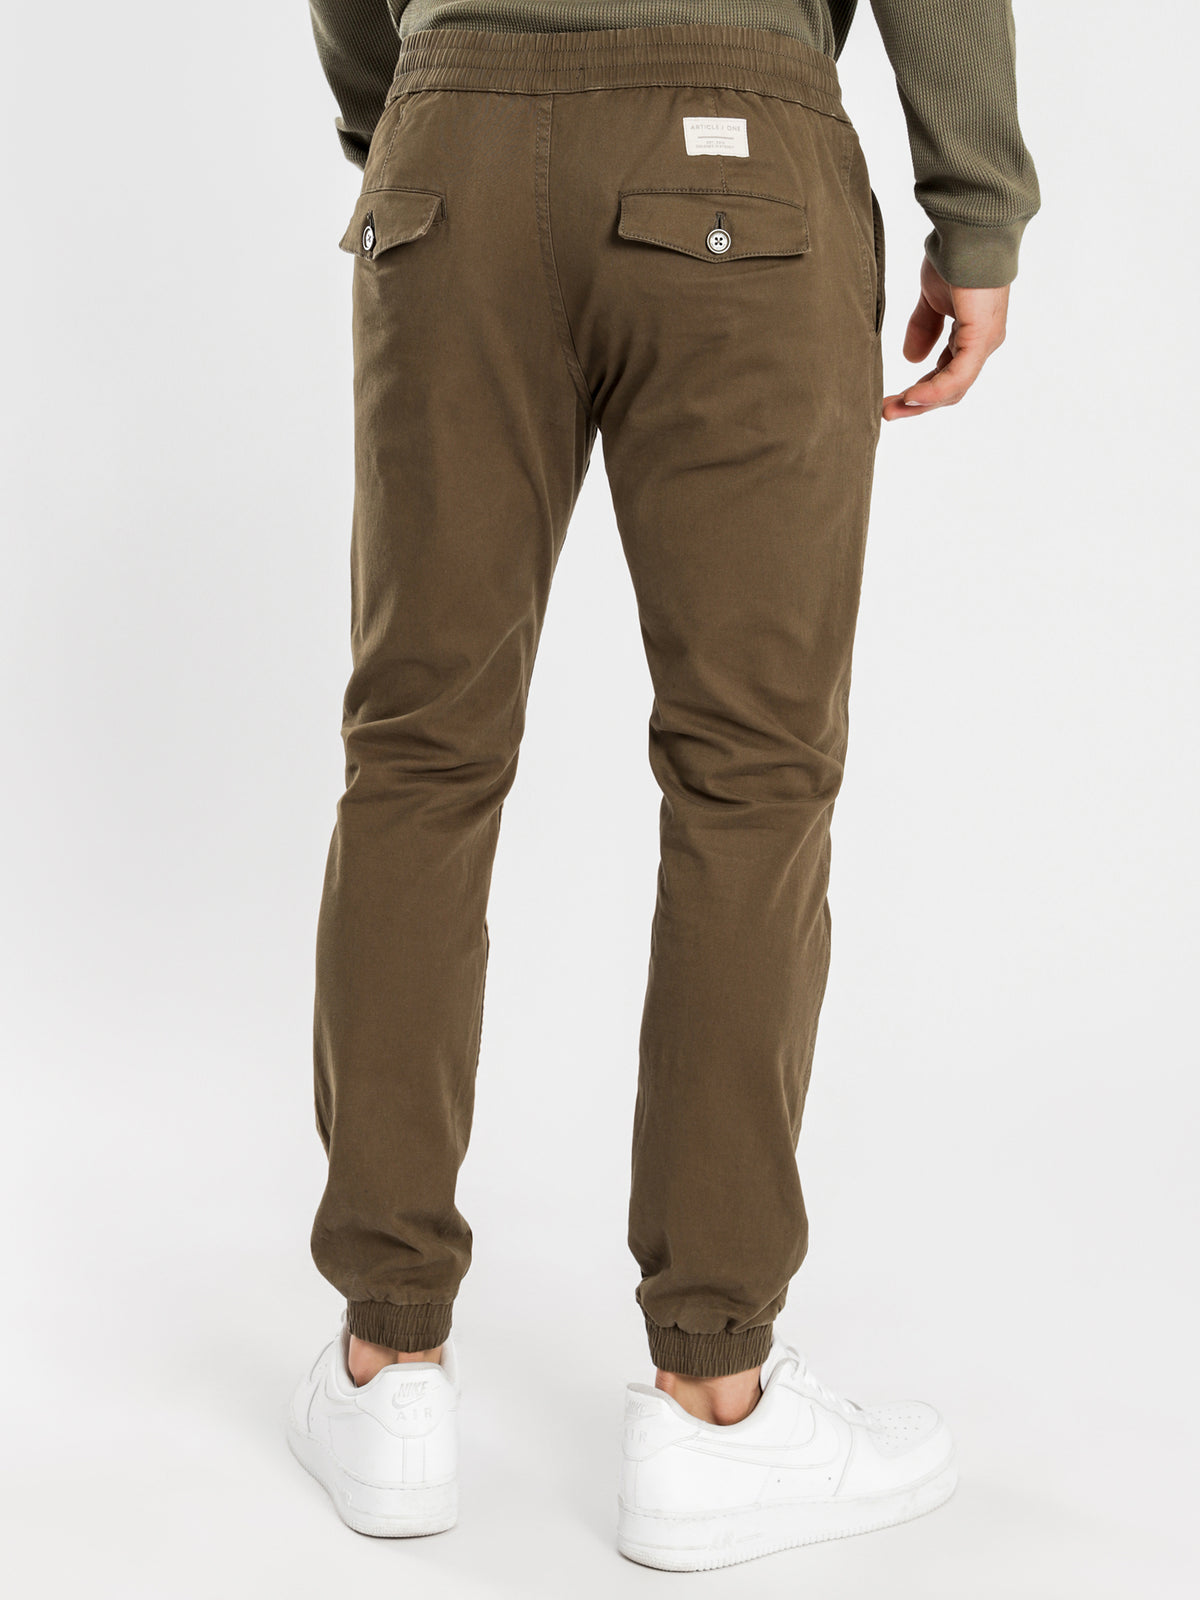 Boden Joggers in Olive Green